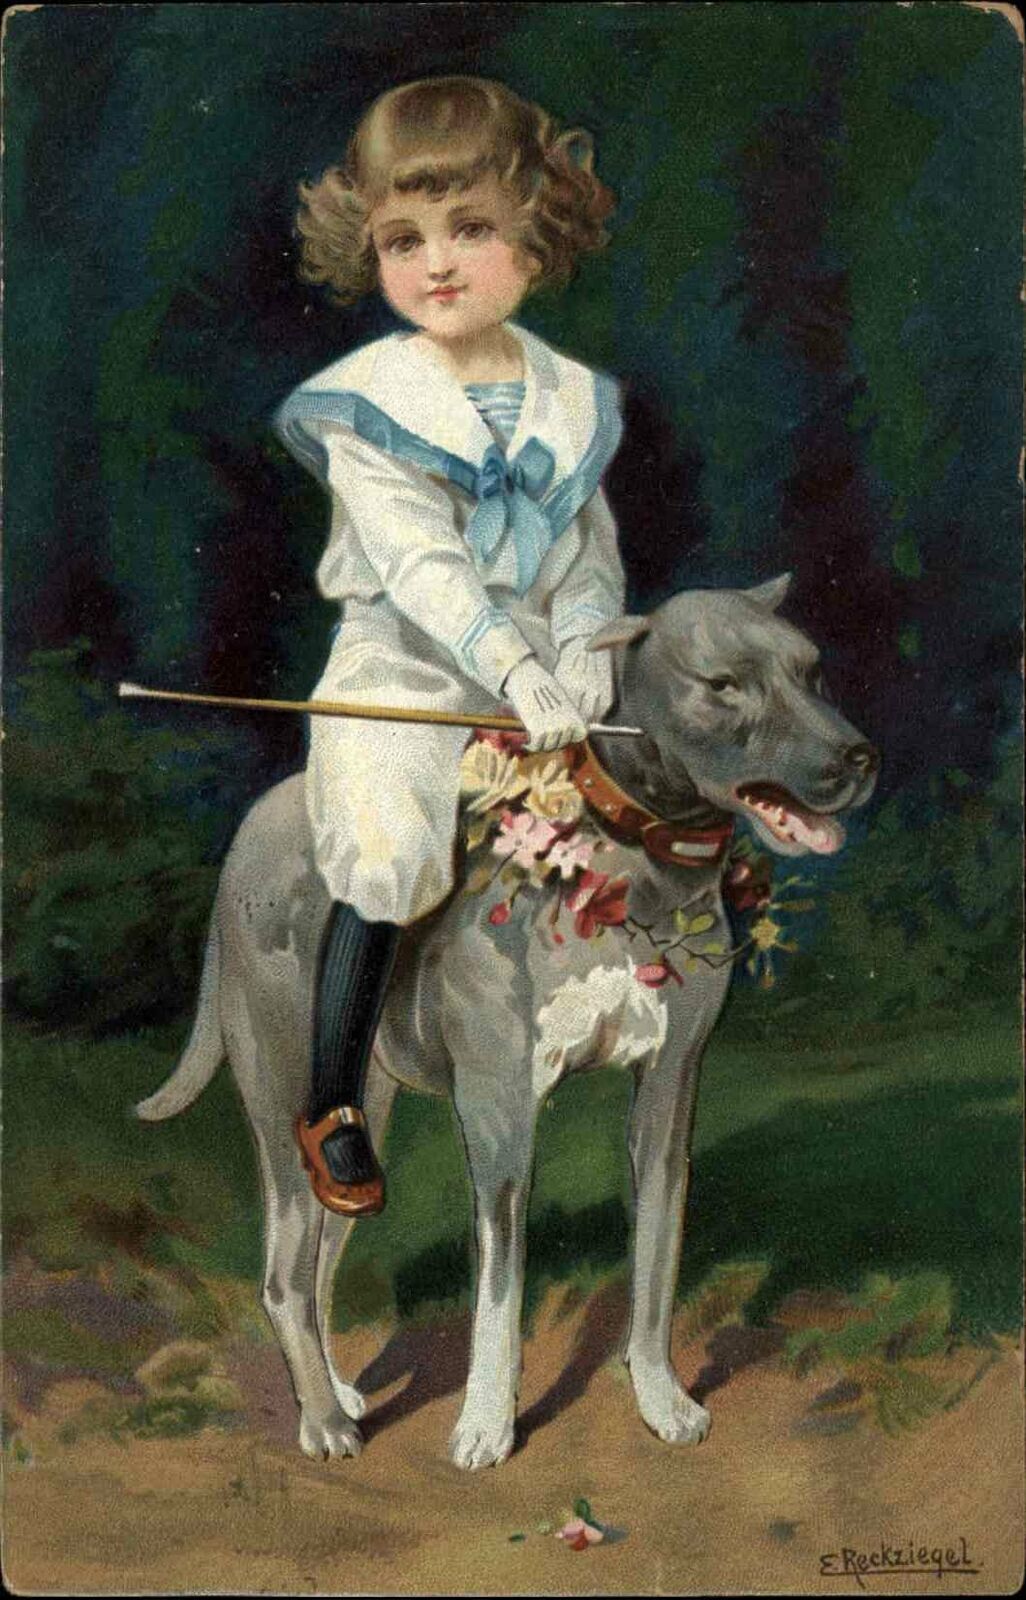 can a child ride a great dane